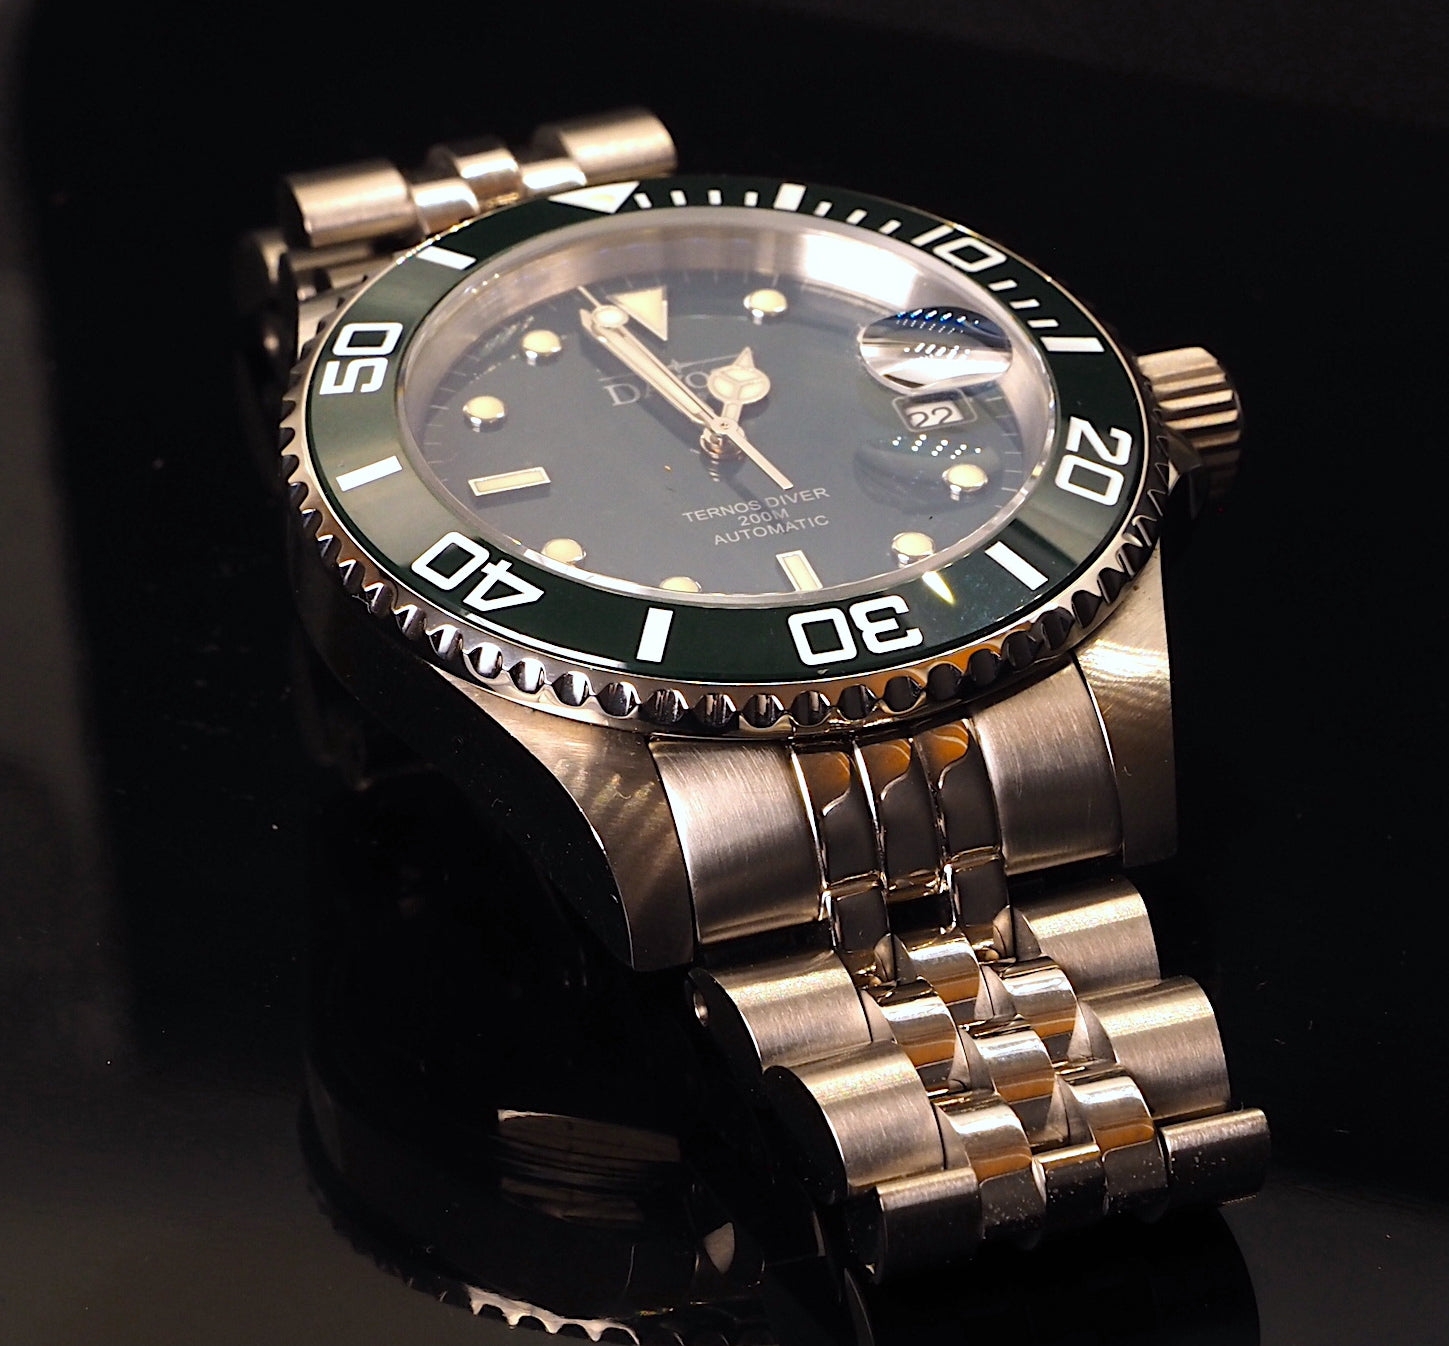 Davosa Ternos Automatic Diver, Best Watches For Men, Harley's Time LLC